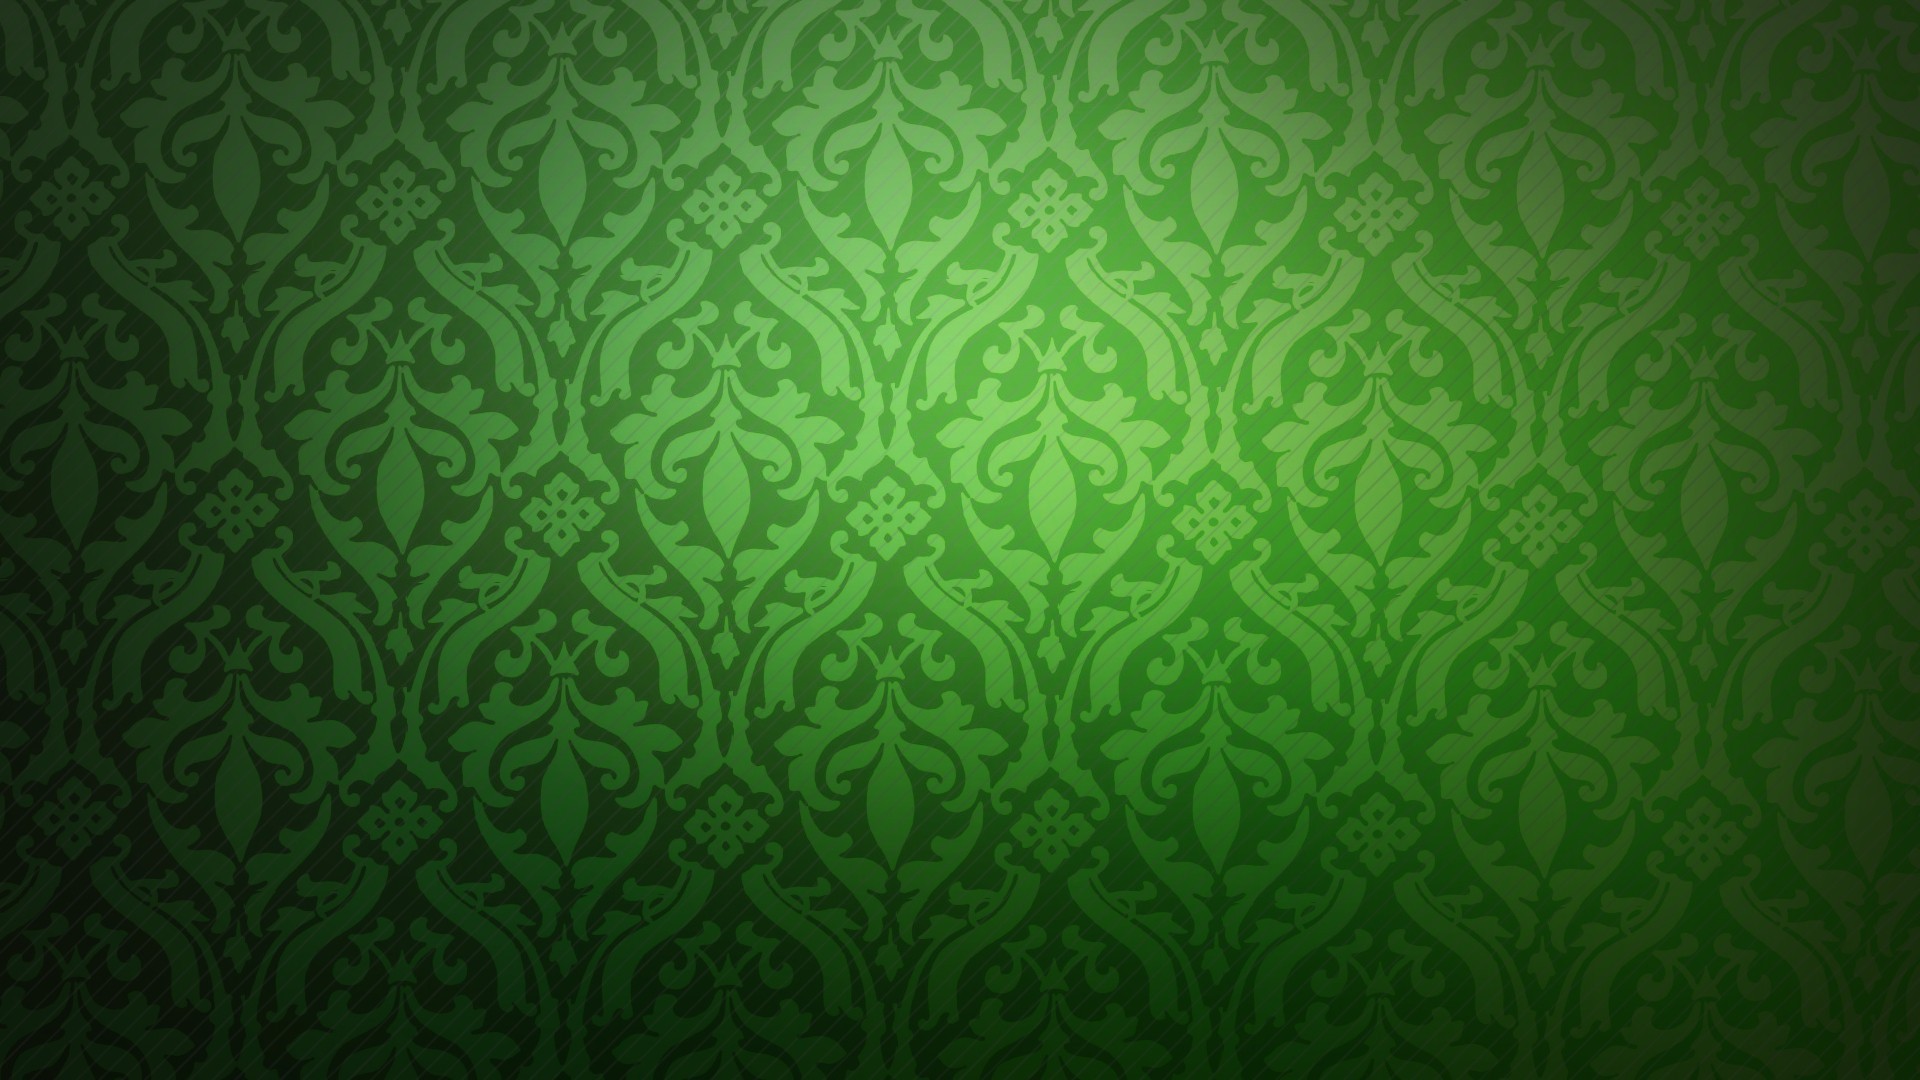 Desktop Wallpaper Dark Green with image resolution 1920x1080 pixel. You can use this wallpaper as background for your desktop Computer Screensavers, Android or iPhone smartphones